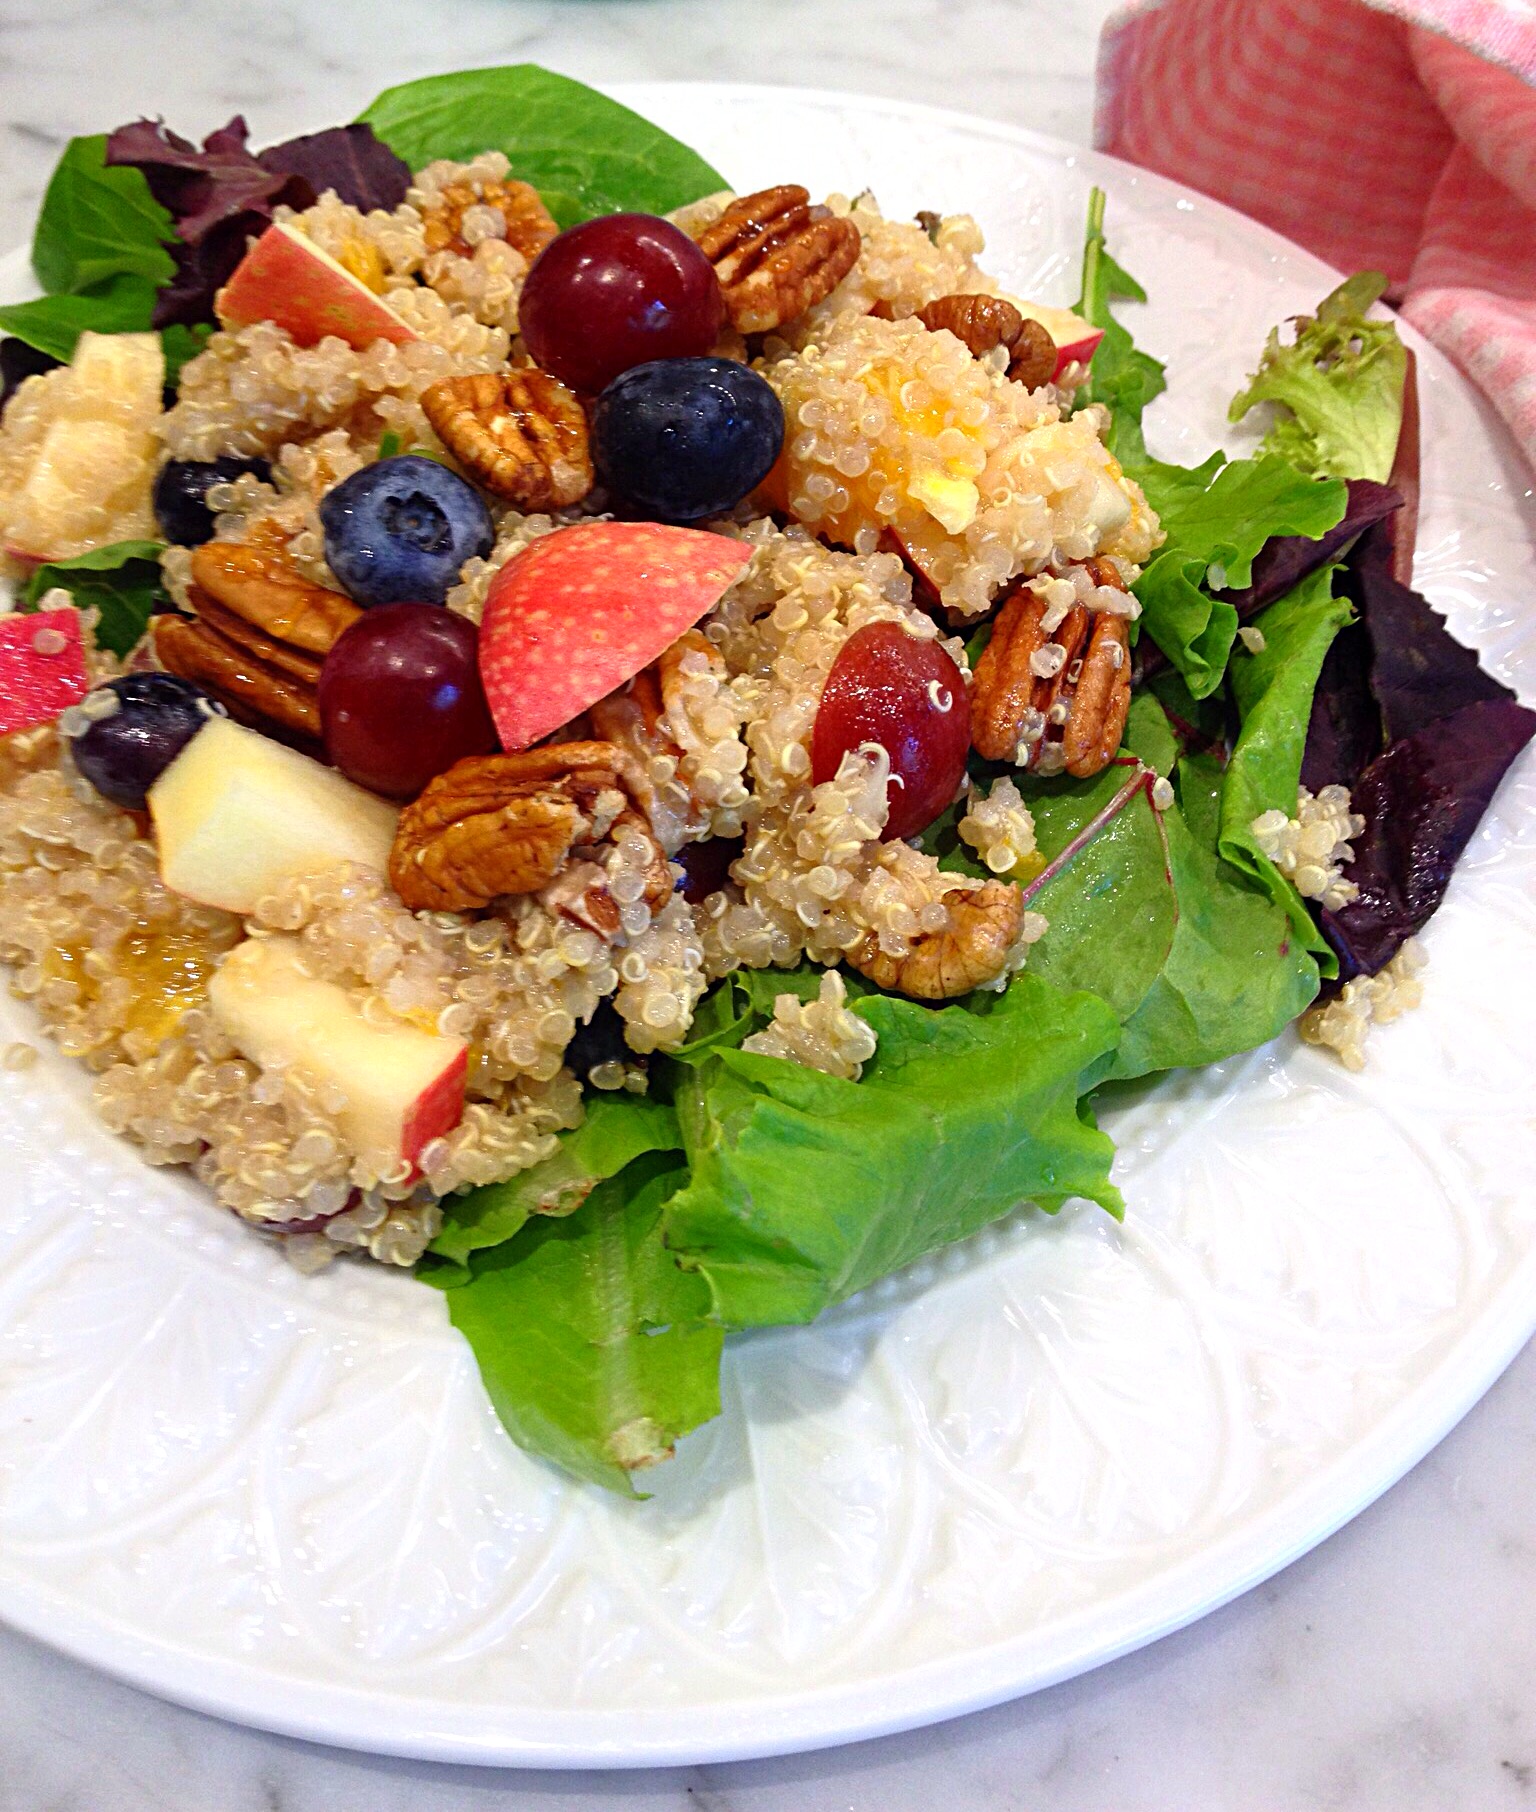 Quinoa Salad with Fruit and Nuts served on a bed of salad greens